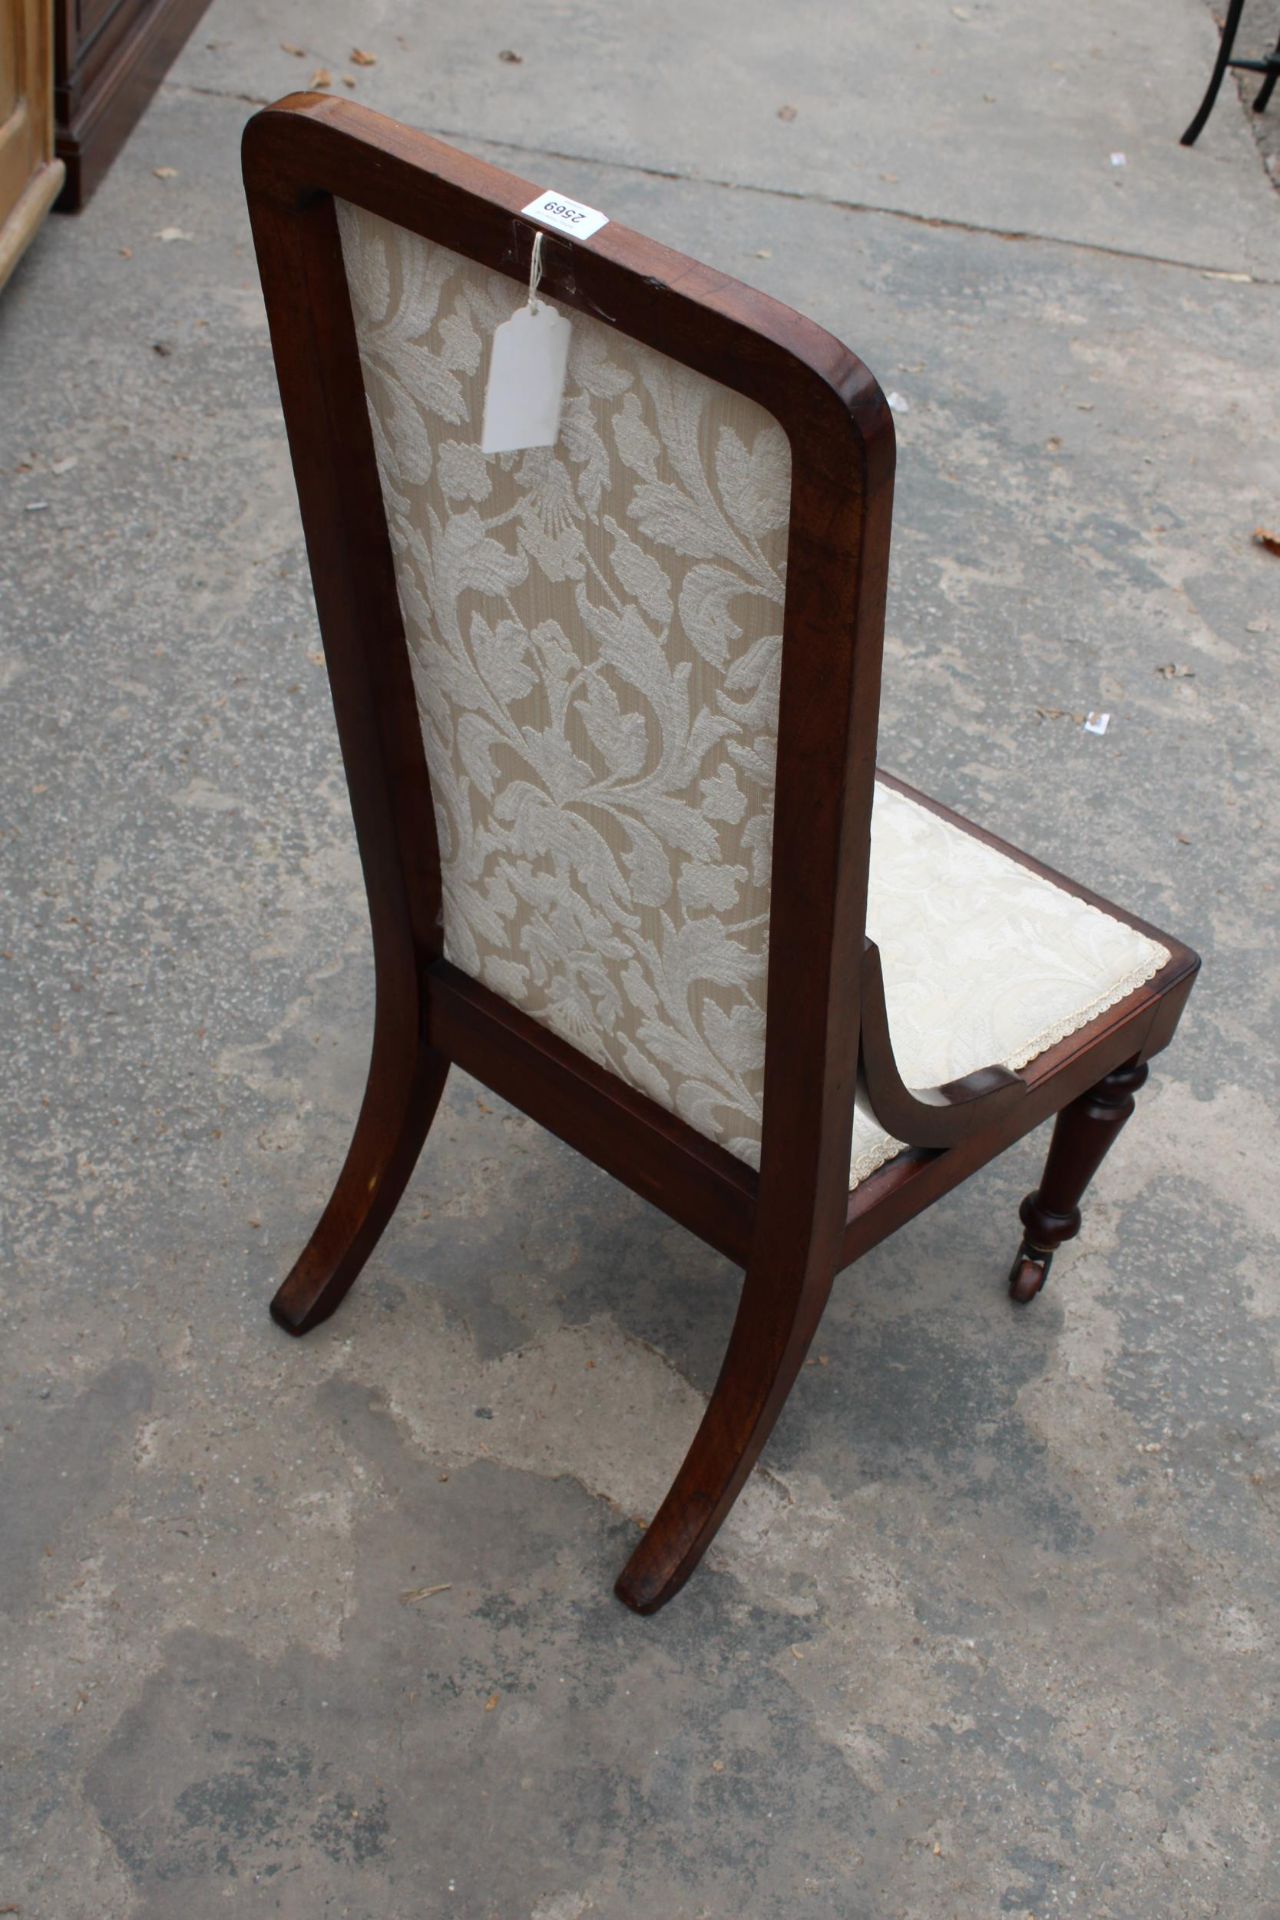 A VICTORIAN MAHOGANY PRIE DIEU CHAIR ON TURNED FRONT LEGS - Image 3 of 3